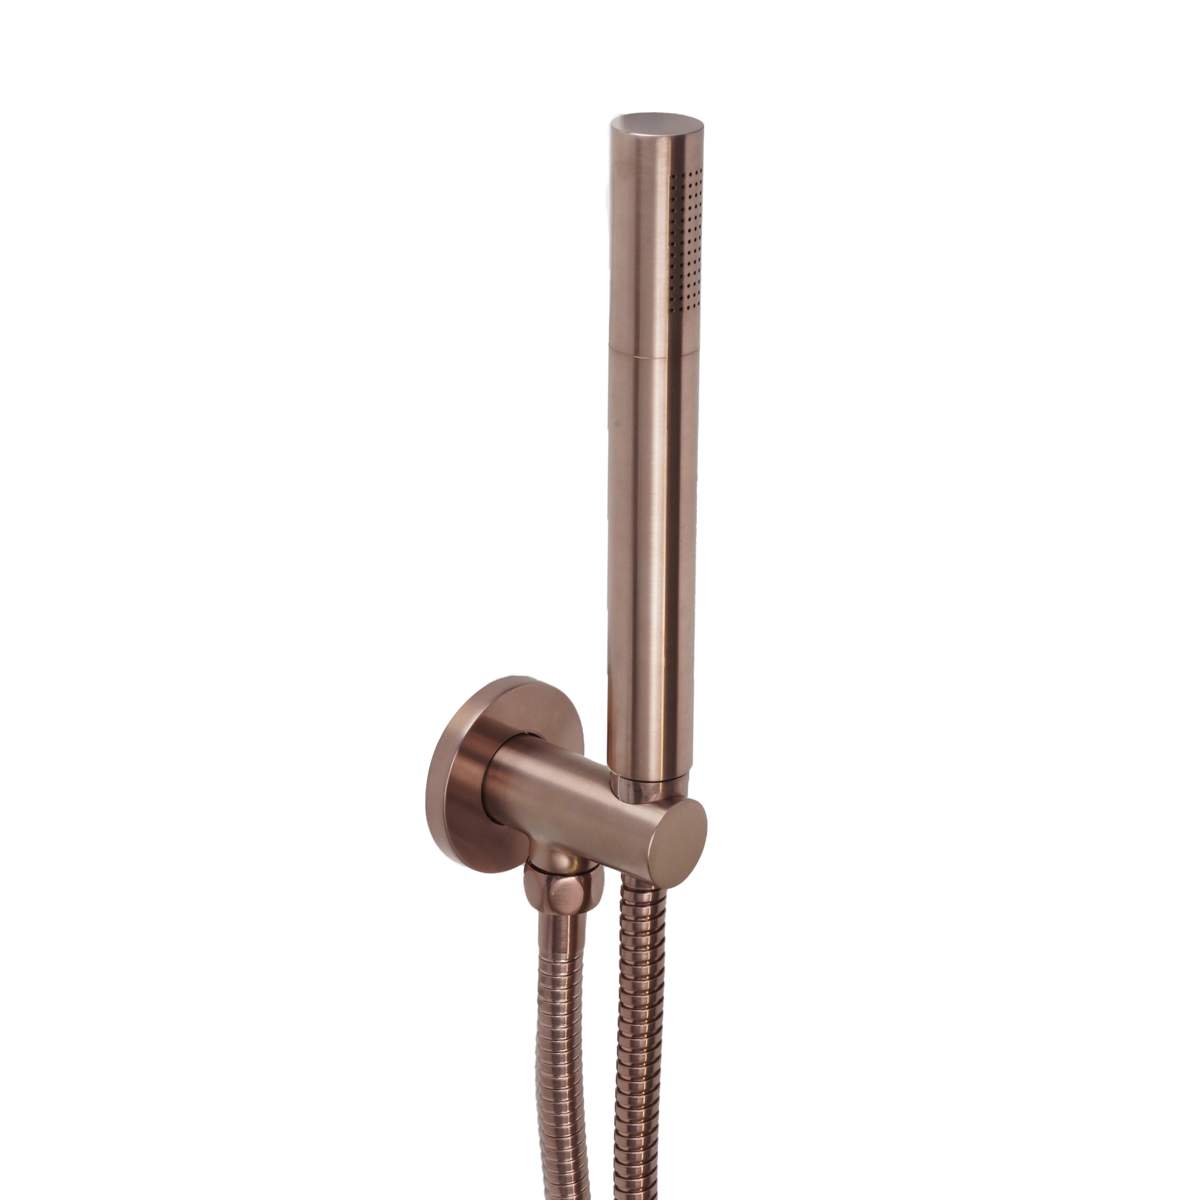 JTP Evo Brushed Bronze Vos Round Water Outlet with Holder, Plastic Hose and Slim Hand Shower